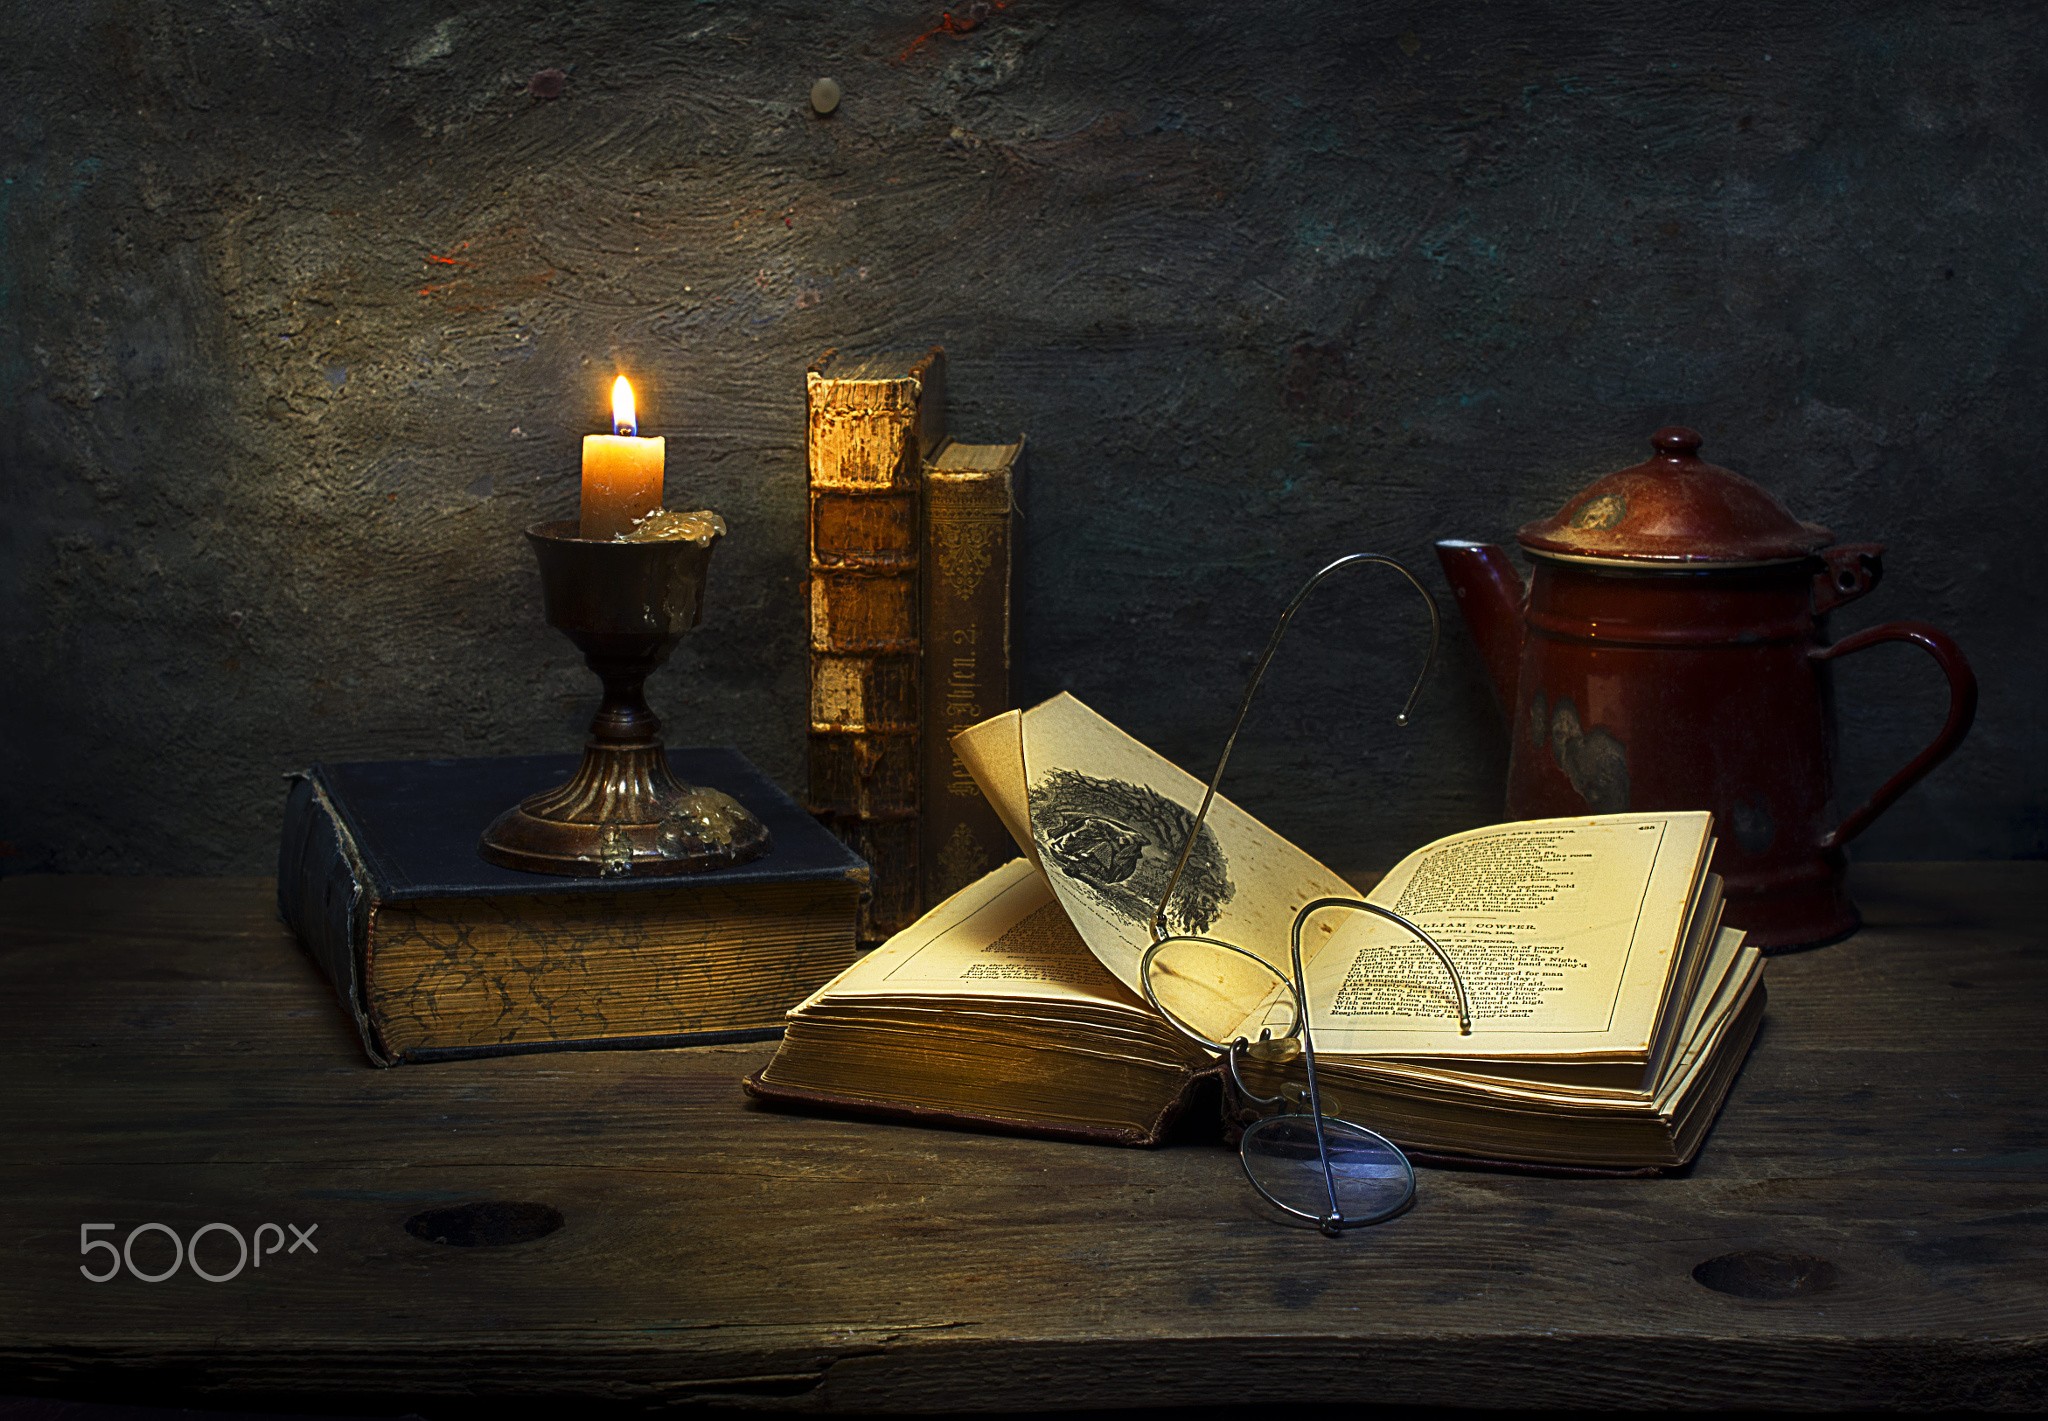 General 2048x1421 candles still life 500px books glasses